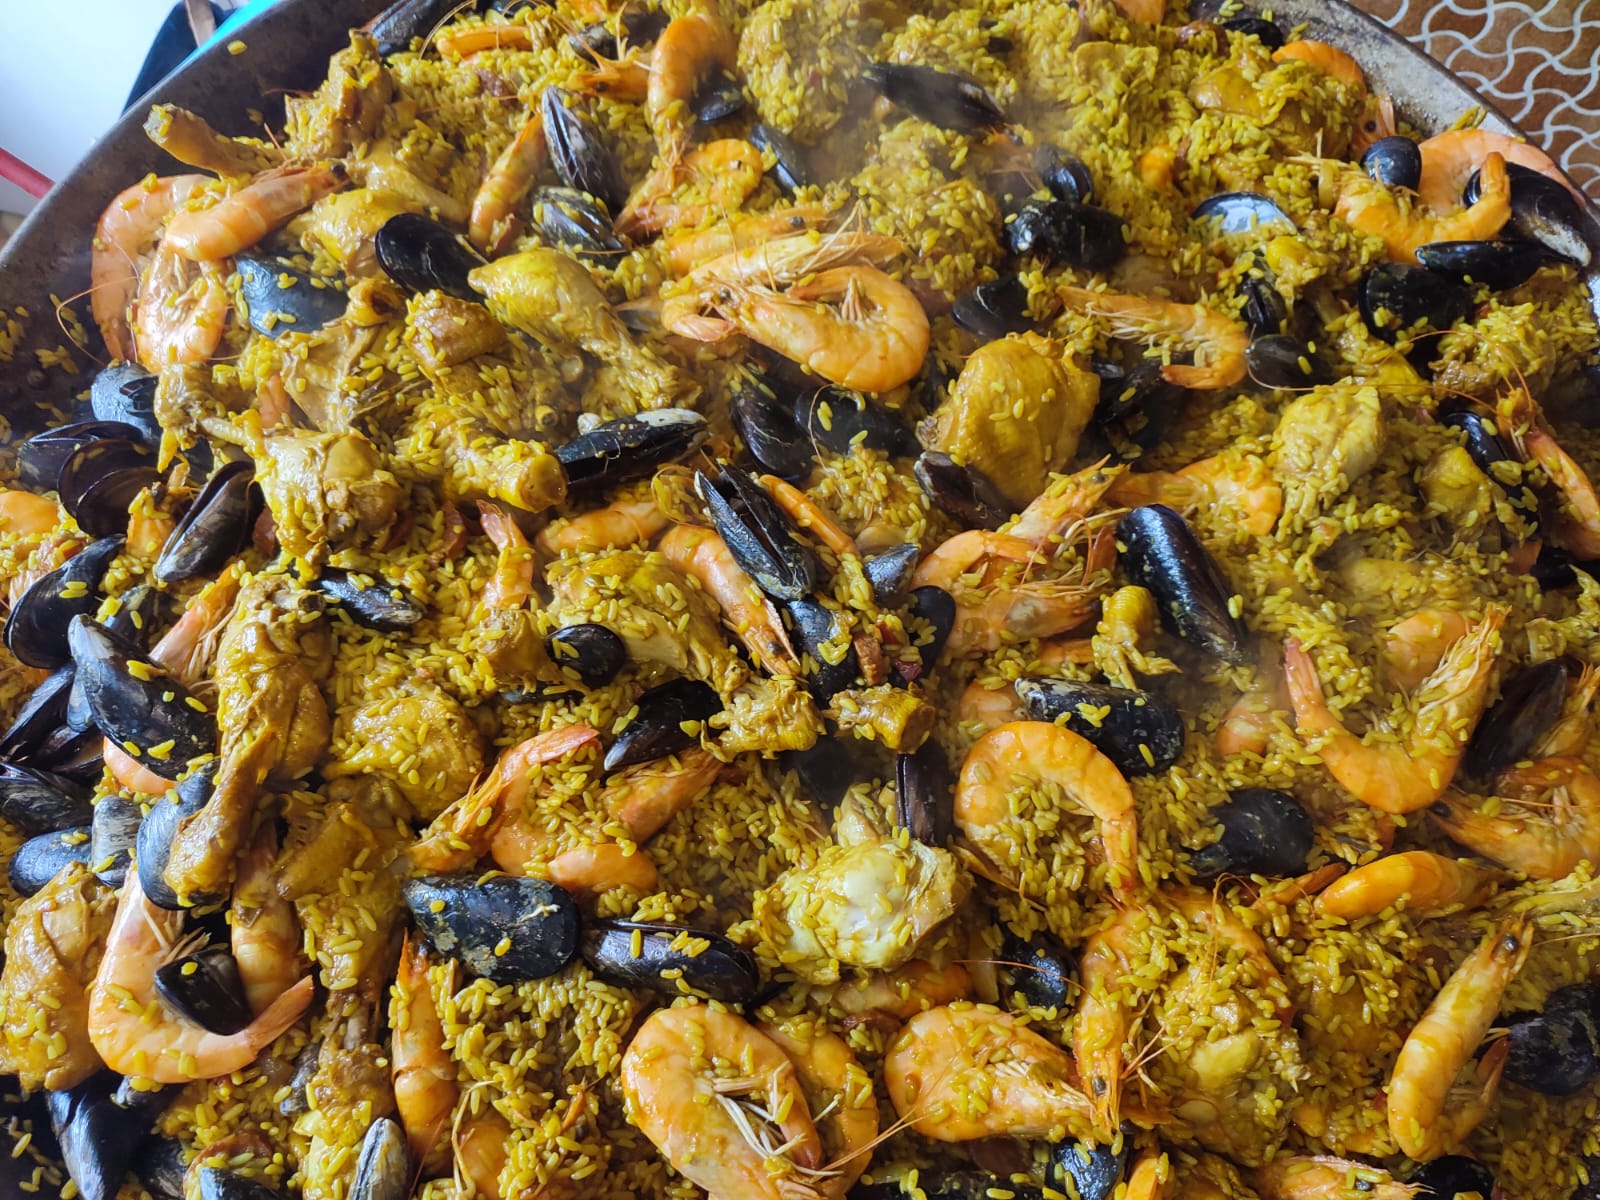 Stand marché paella